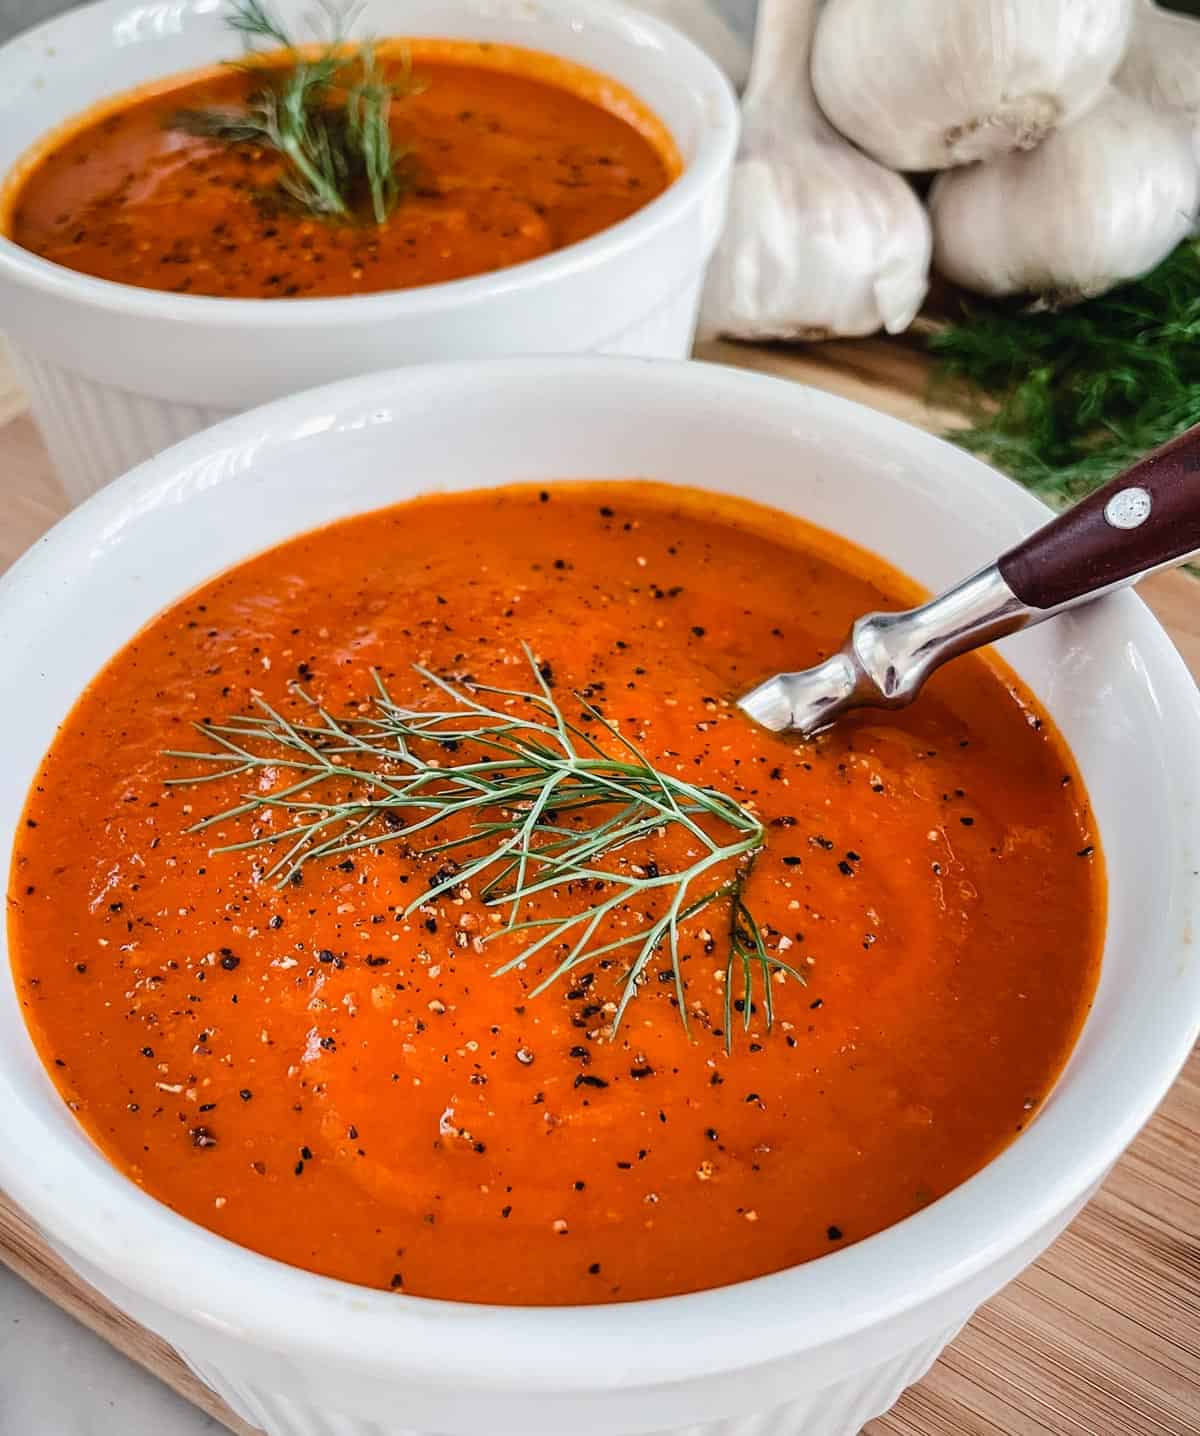 2 white bowls filled with Tomato and Fennel Soup garnished with pepper and a fennel sprig sitting on a wood table with garlic bulbs in the background